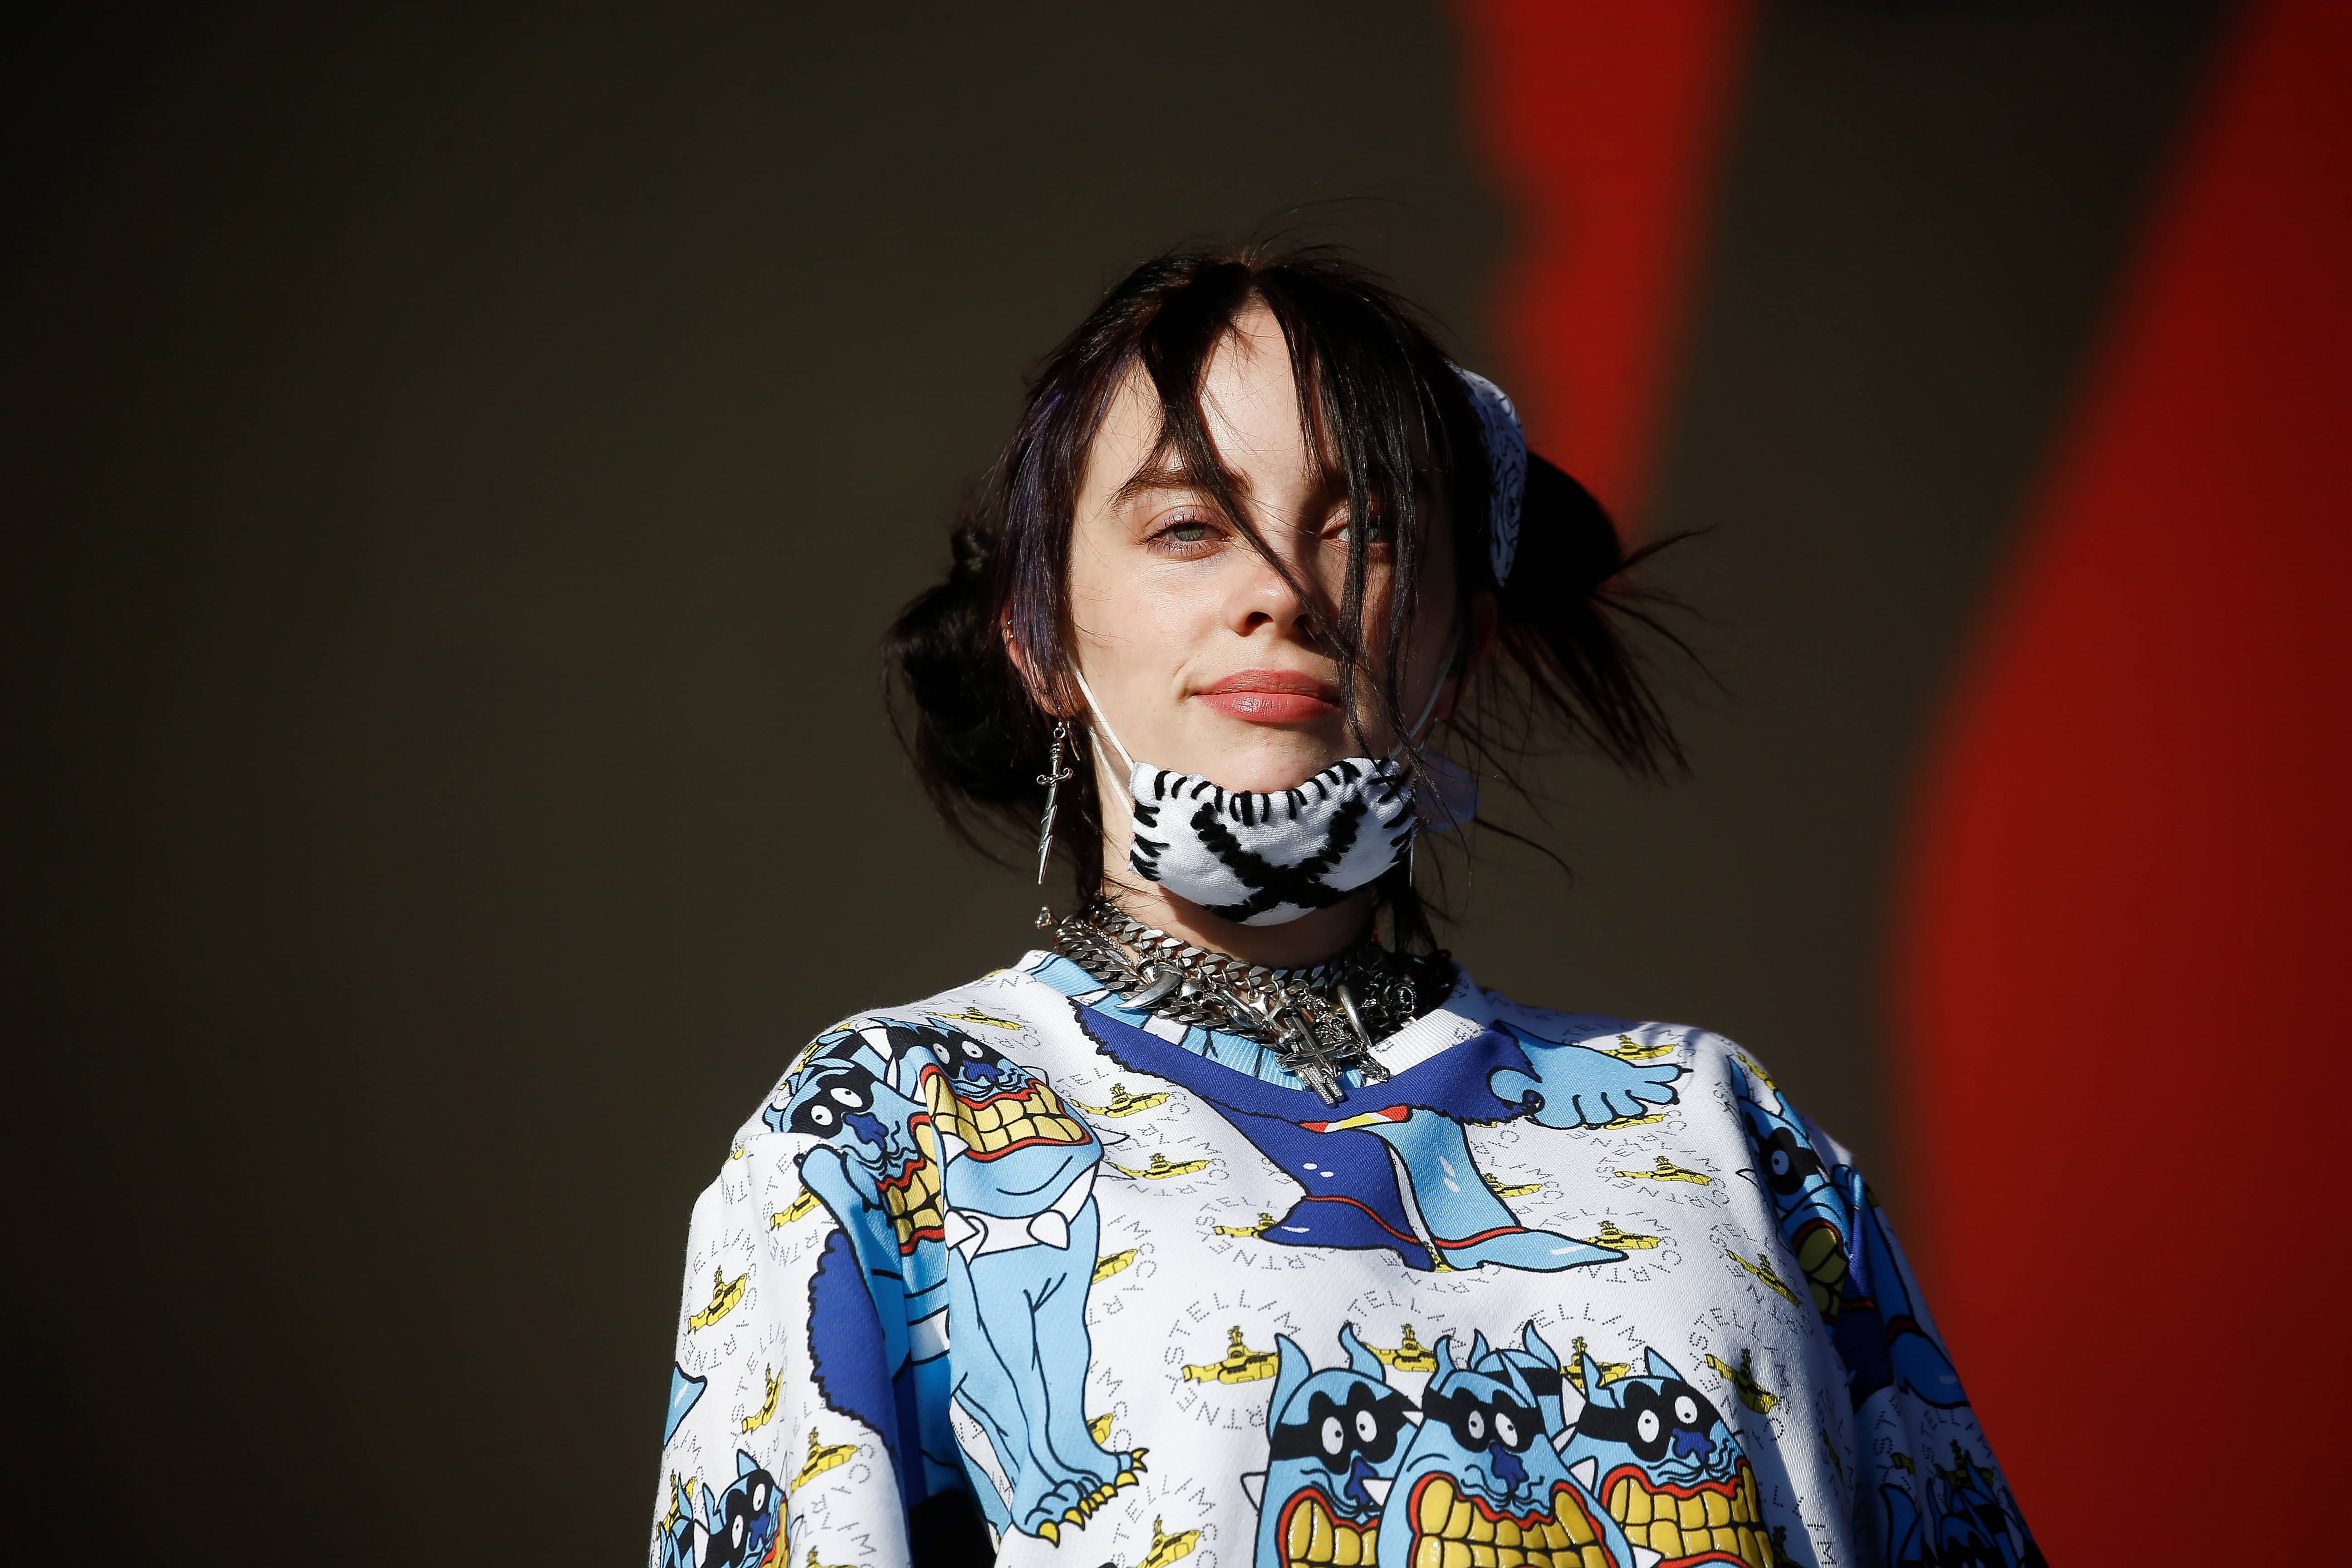 american-singer-billie-eilish-performs-on-the-other-stage-during-glastonbury-festival-in-somerset